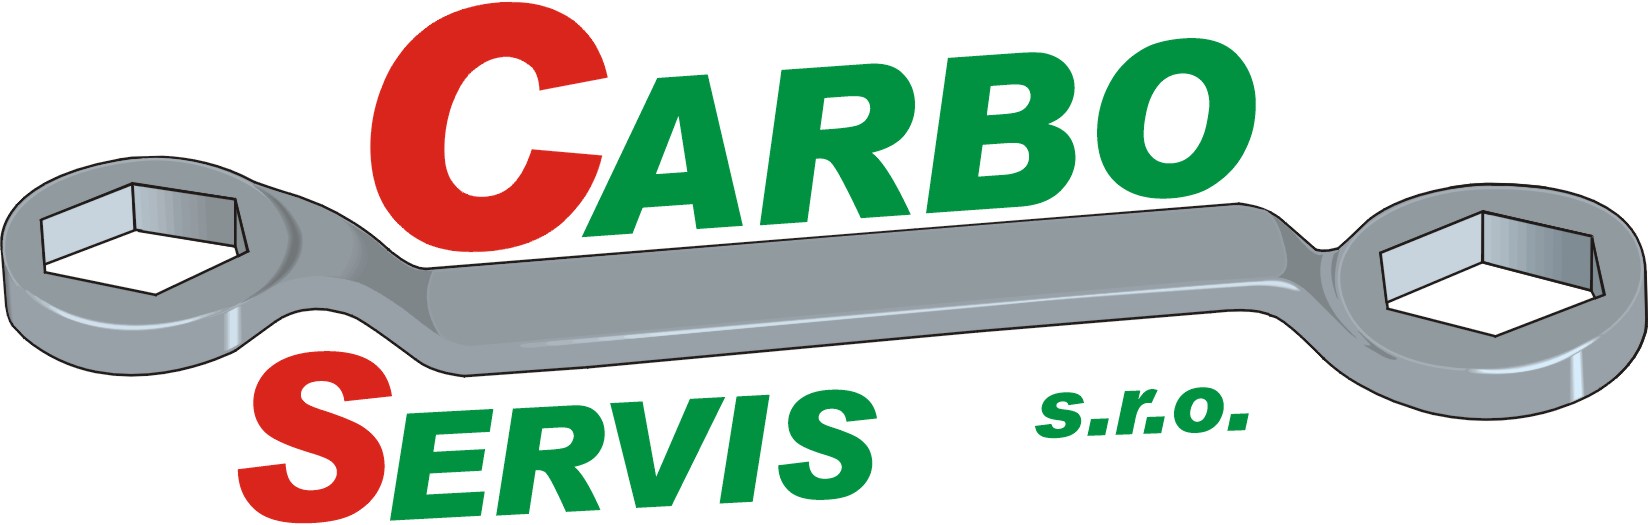 Carbo Servis s.r.o.